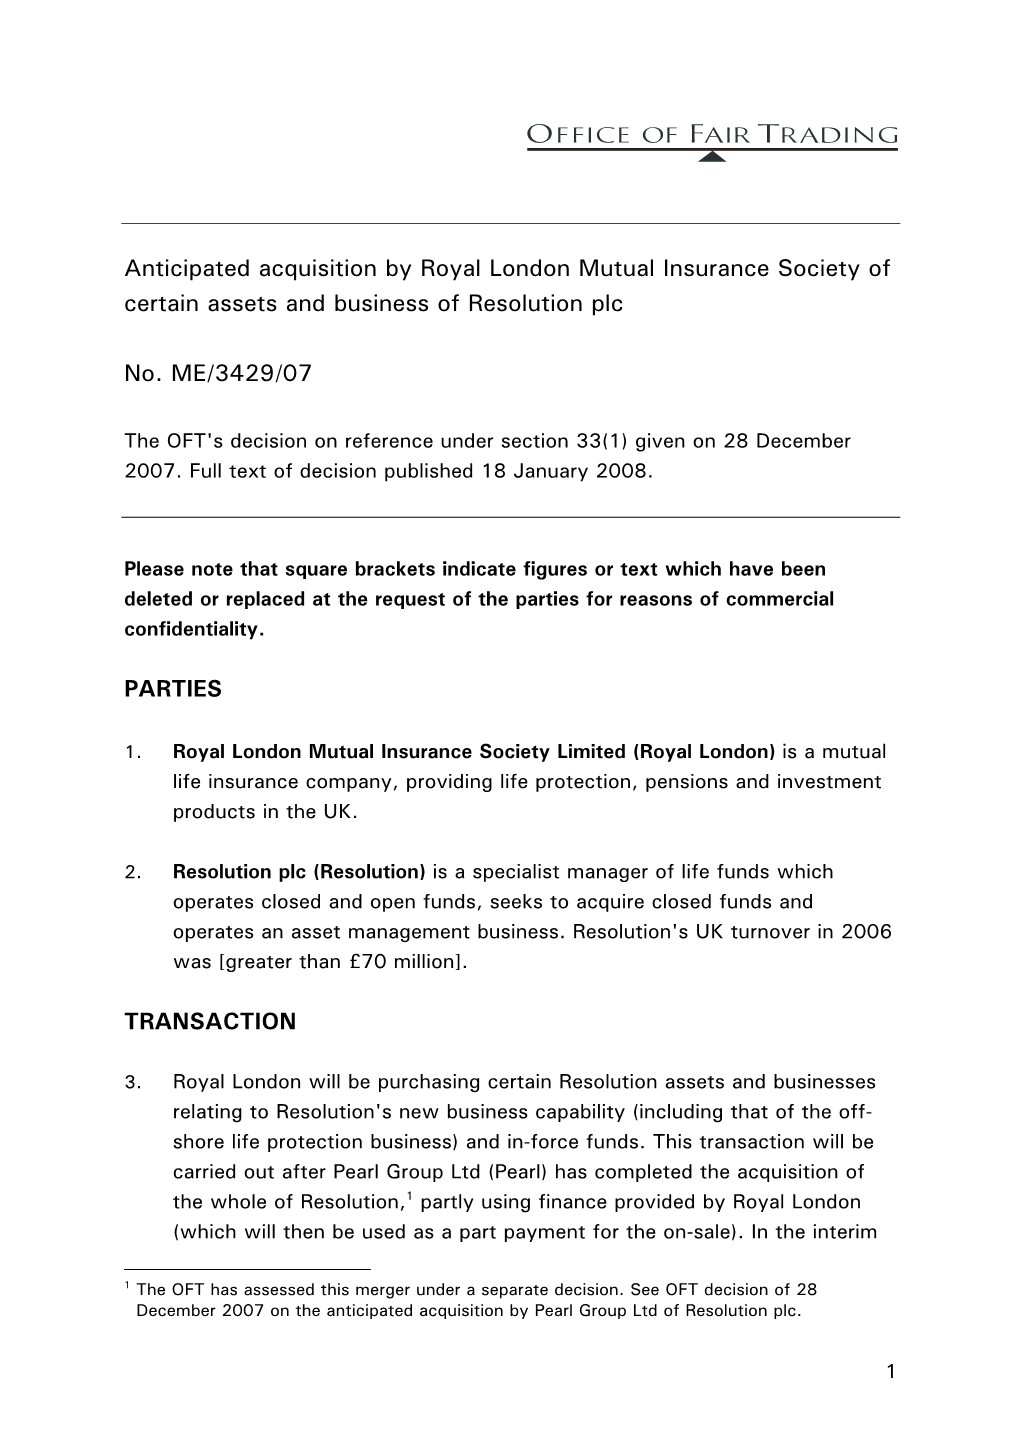 Anticipated Acquisition by Royal London Mutual Insurance Society of Certain Assets and Business of Resolution Plc